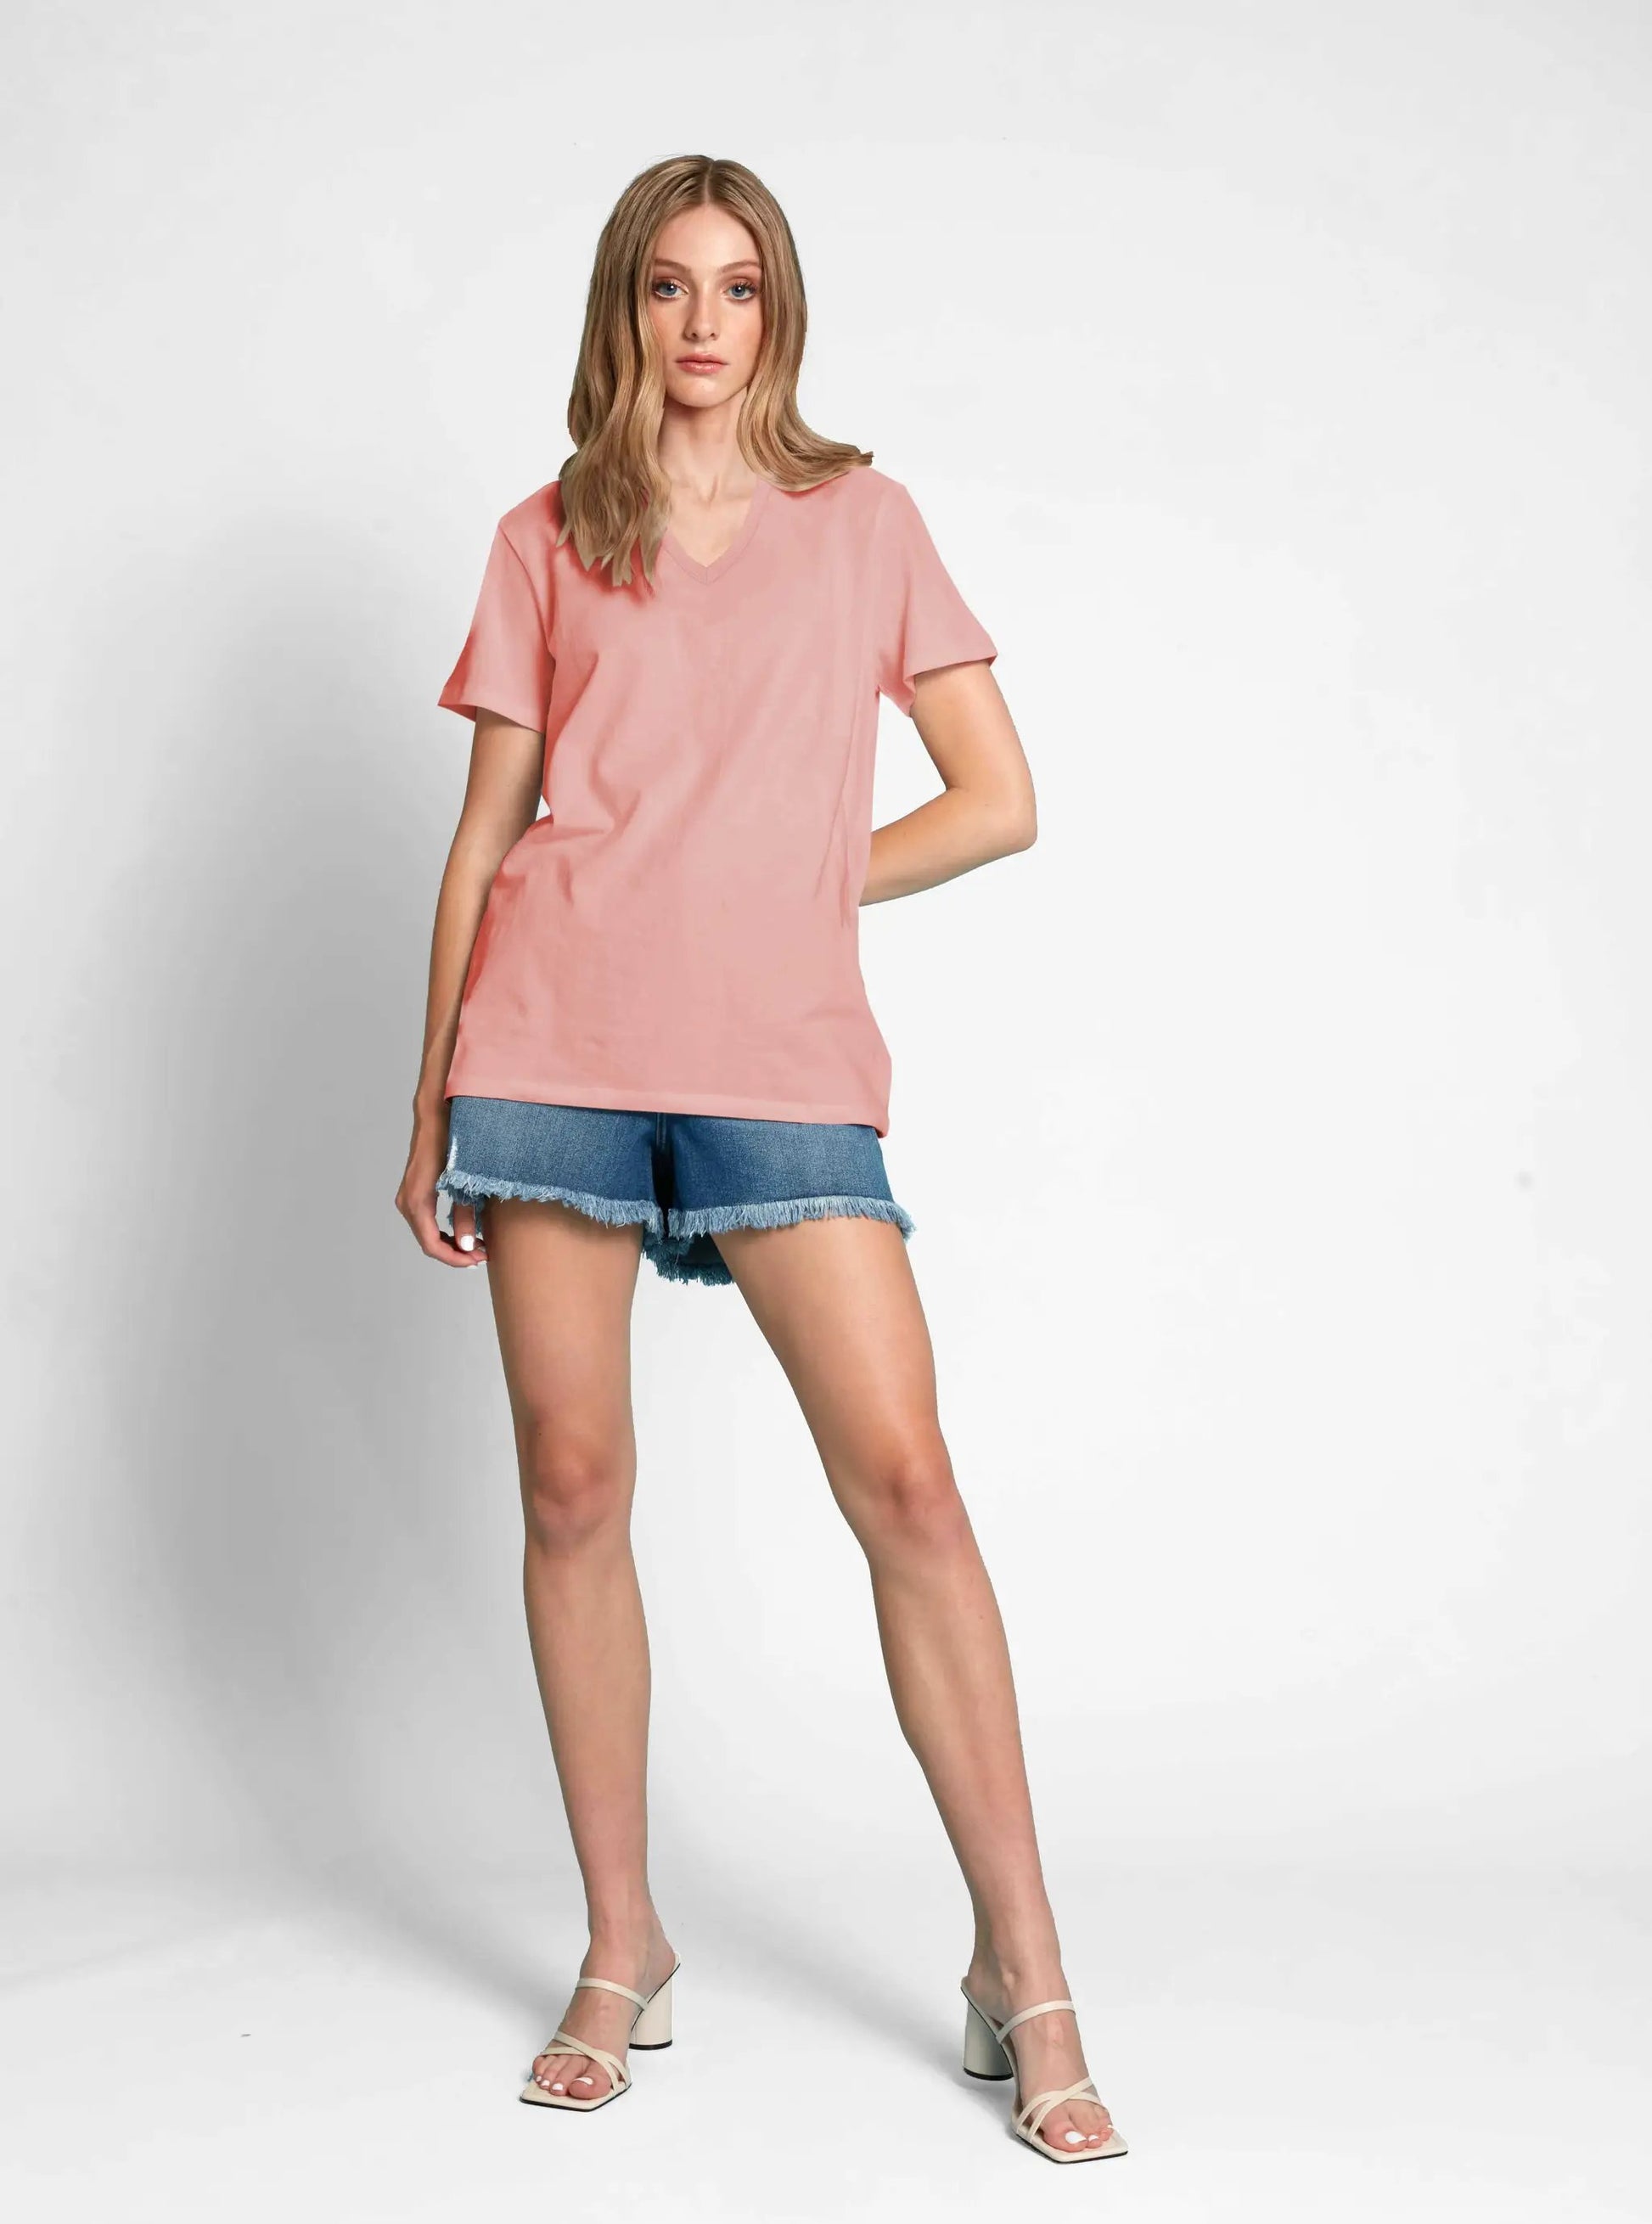 Woman posing in a high-quality, Point Zero Classic V Neck T-shirt and denim shorts against a white background.